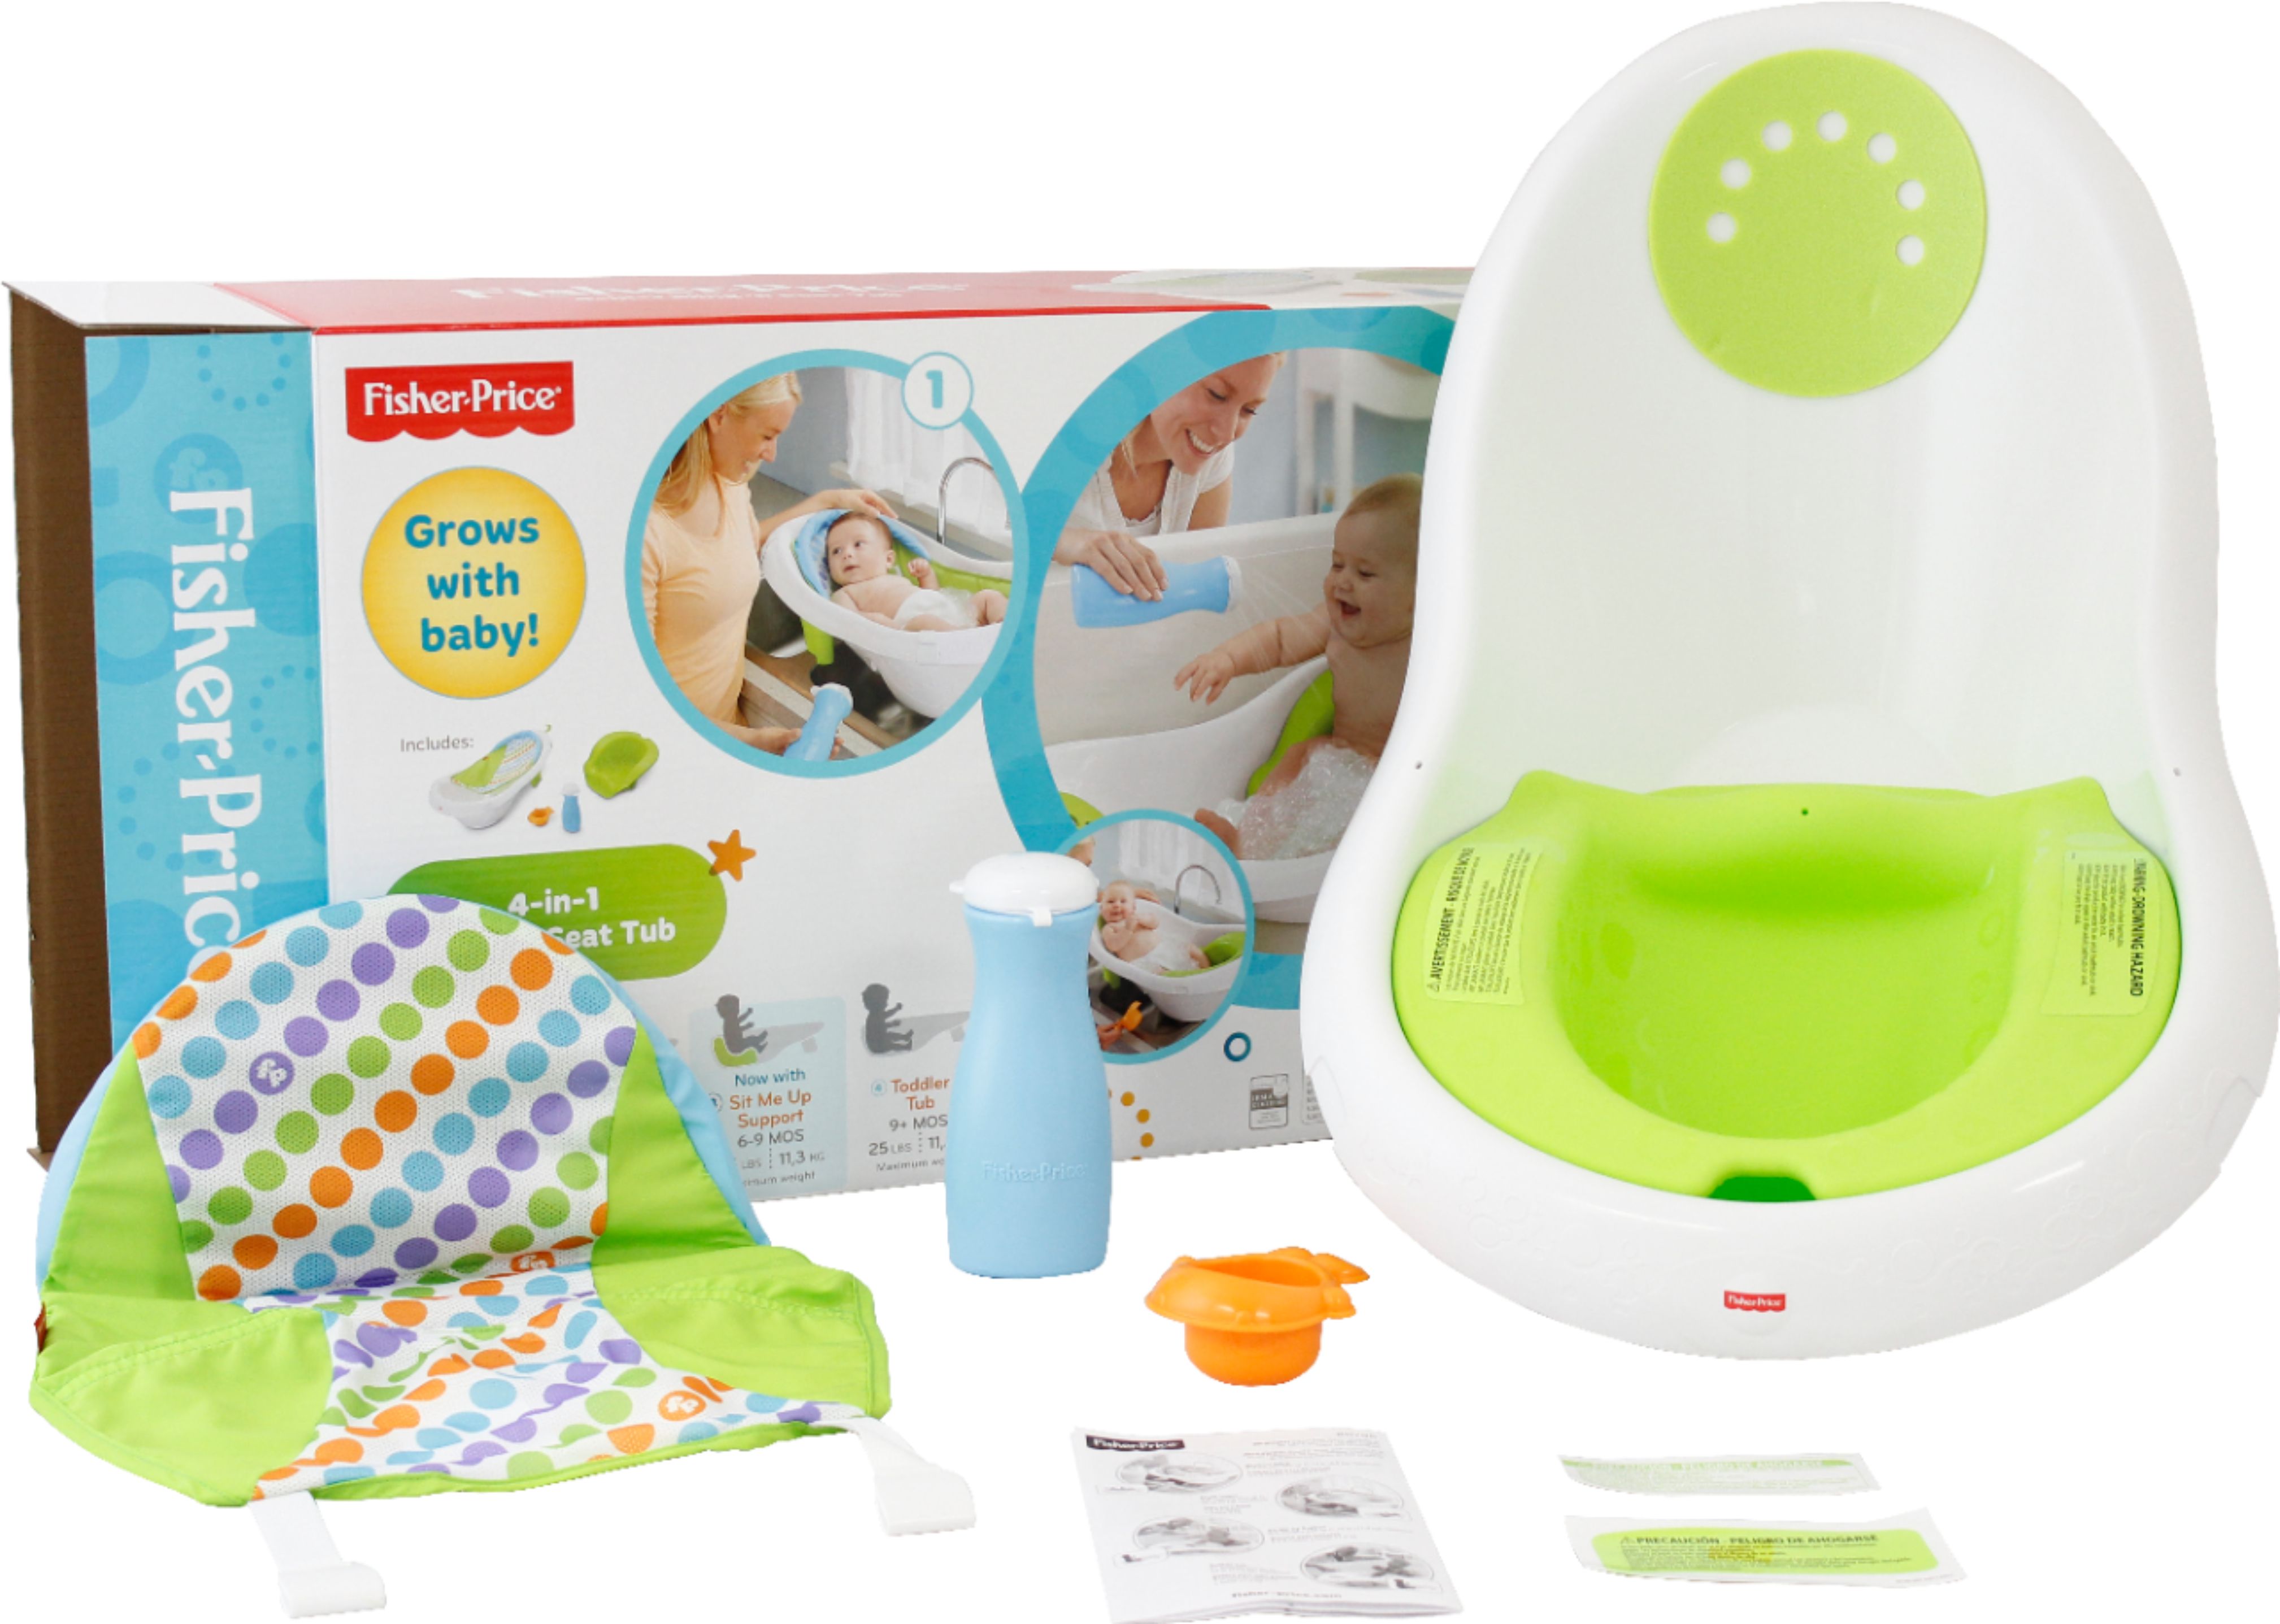 Fisher-Price 4-in-1 Sling 'n Seat Tub White/Green BDY86 - Best Buy